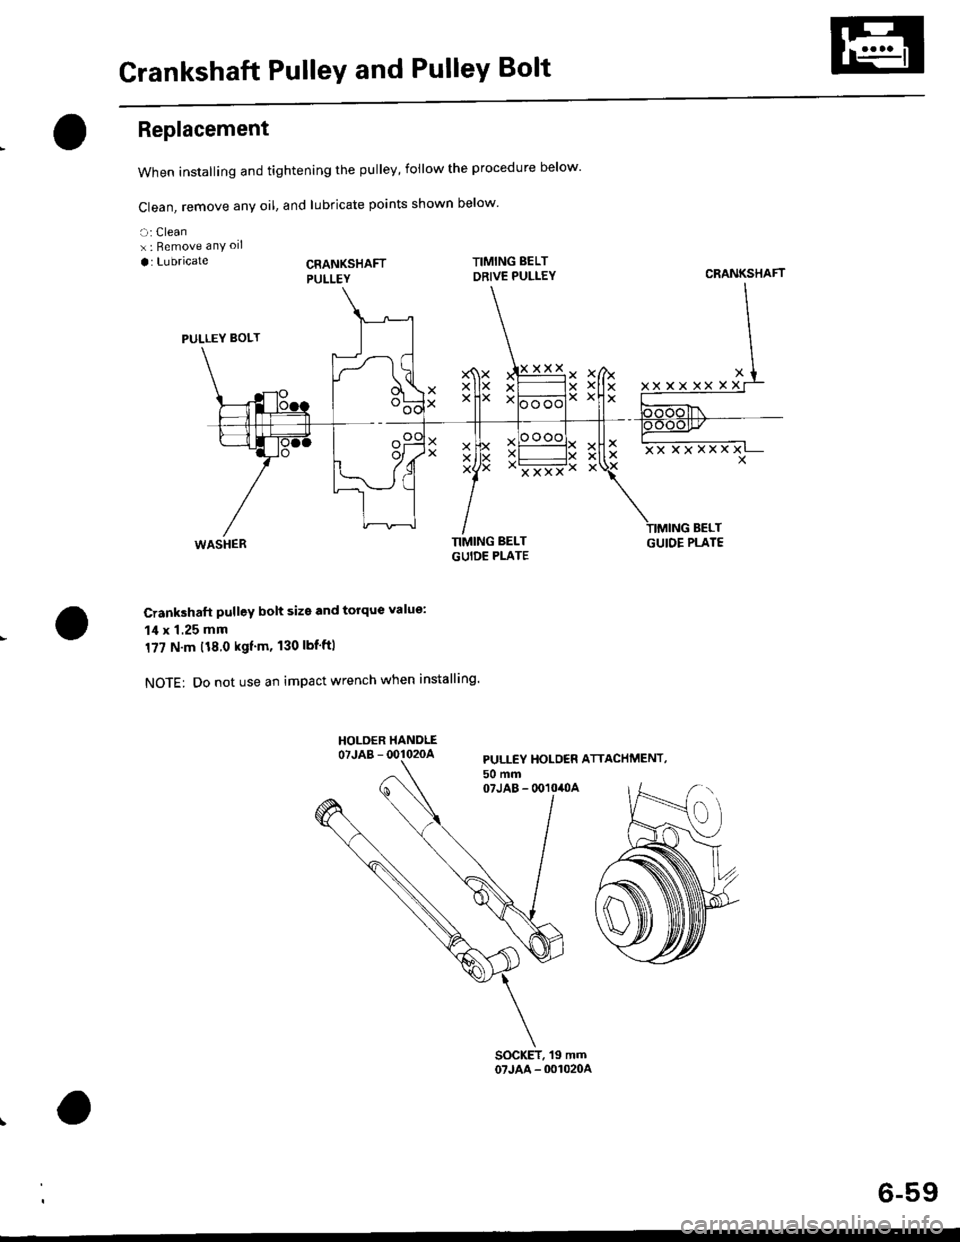 HONDA CIVIC 1996 6.G User Guide Crankshaft PulleY and PulleY Bolt
Replacement
When installing and tightening the pulley, follow the procedure below
Clean, remove any oil, and lubricate points shown below
a: Cleanx : Bemove anY oll
